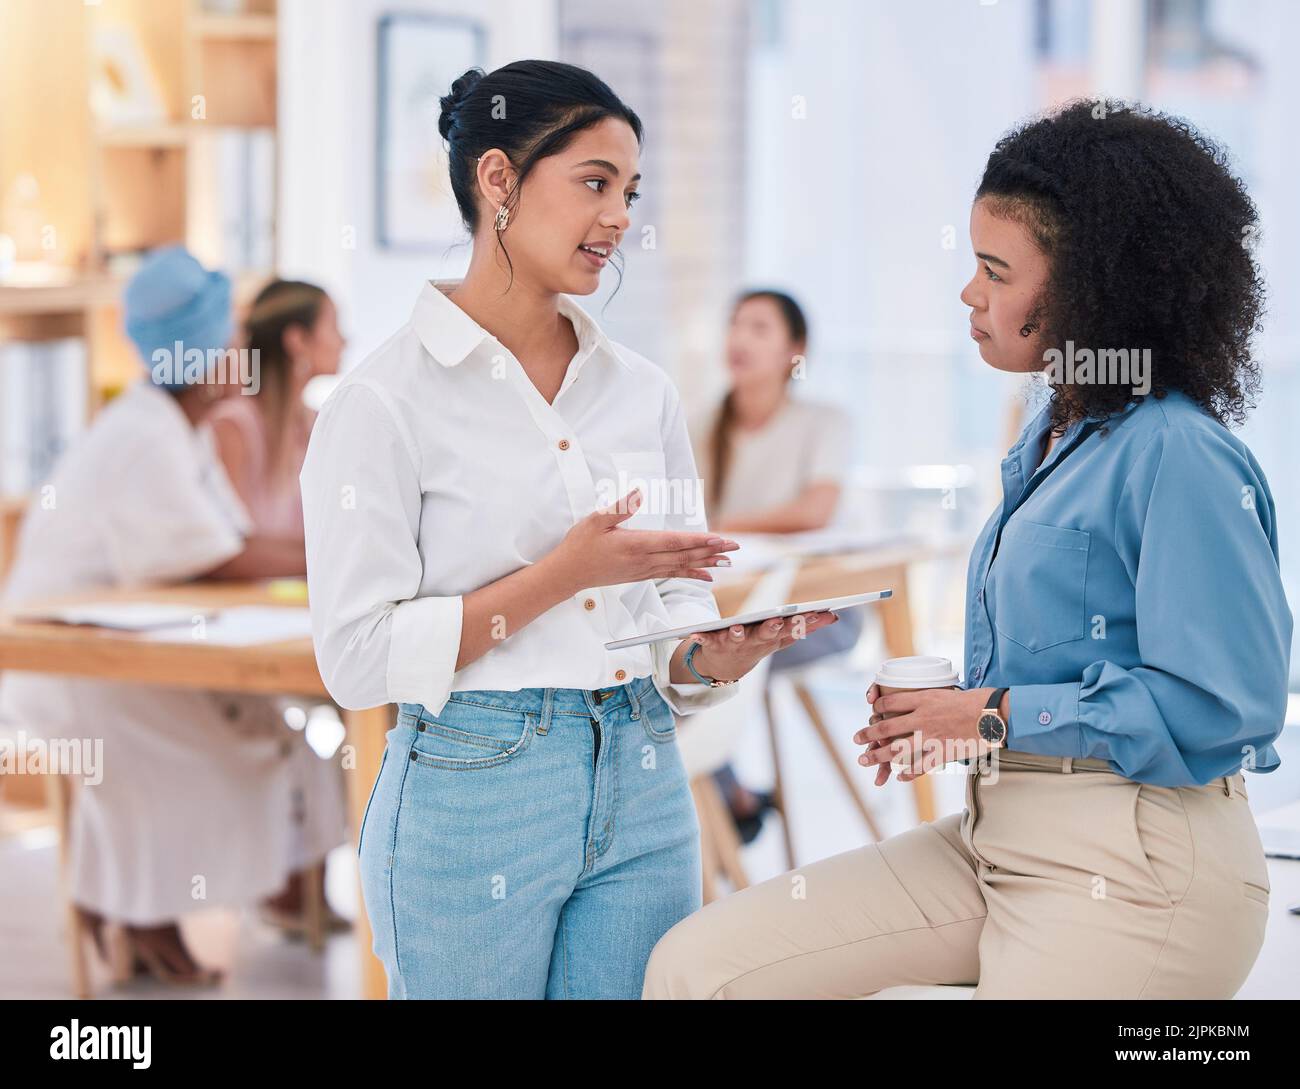 Empowered businesswomen working together on a project in the office. Female employees at work talking, collaborating, and brainstorming. Marketing Stock Photo